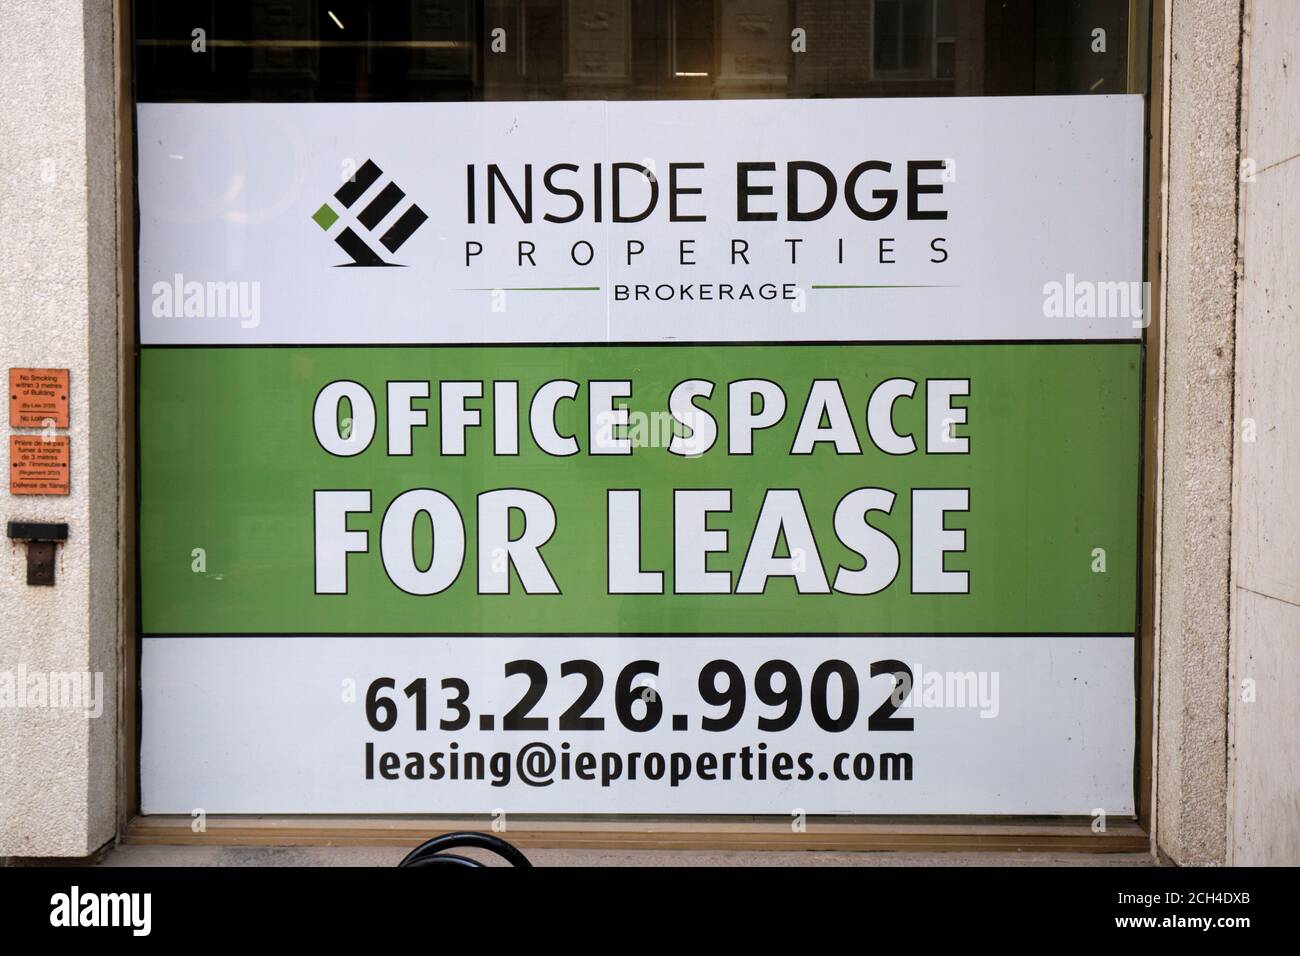 Office Space For Lease sign in downtown Ottawa Stock Photo - Alamy